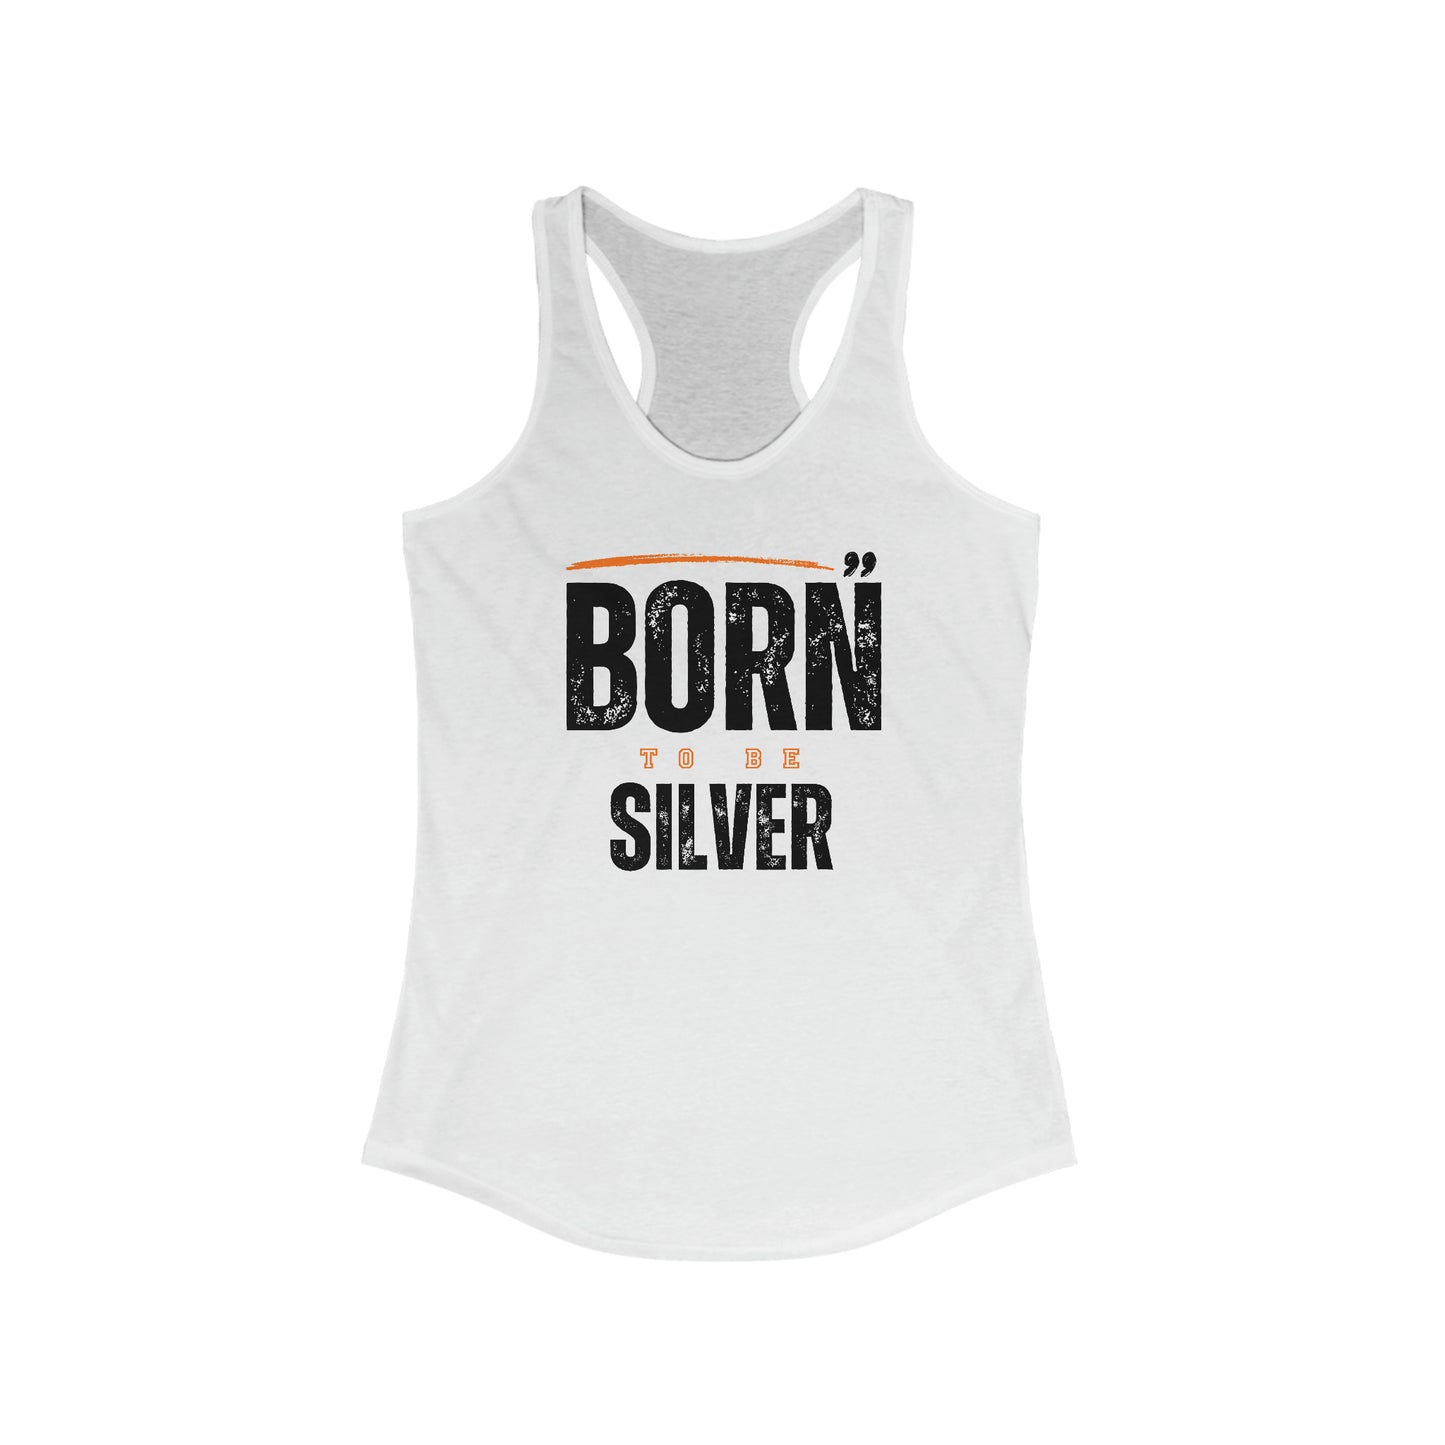 Born to be Silver. Women's Ideal Racerback Tank